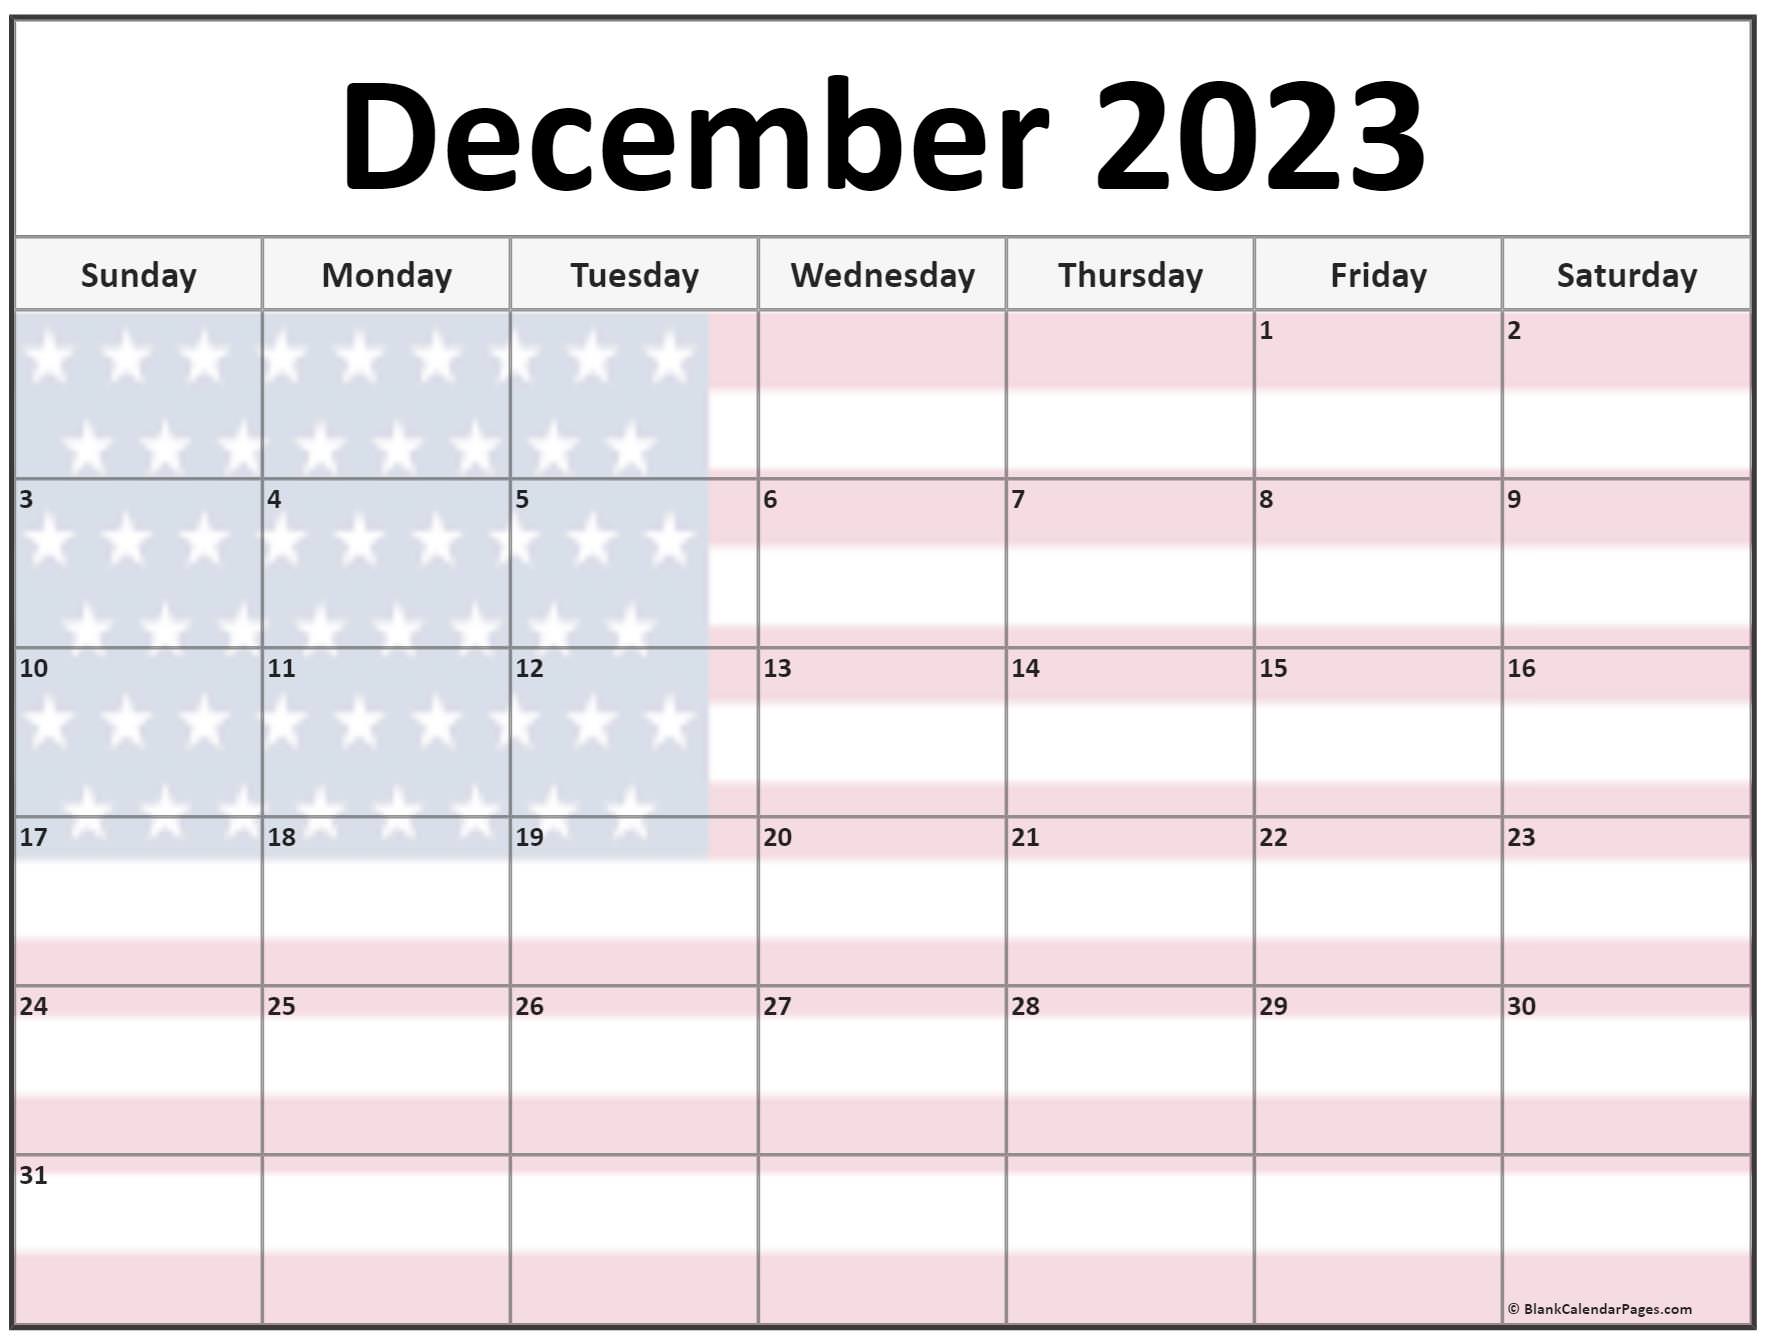 collection-of-december-2023-photo-calendars-with-image-filters